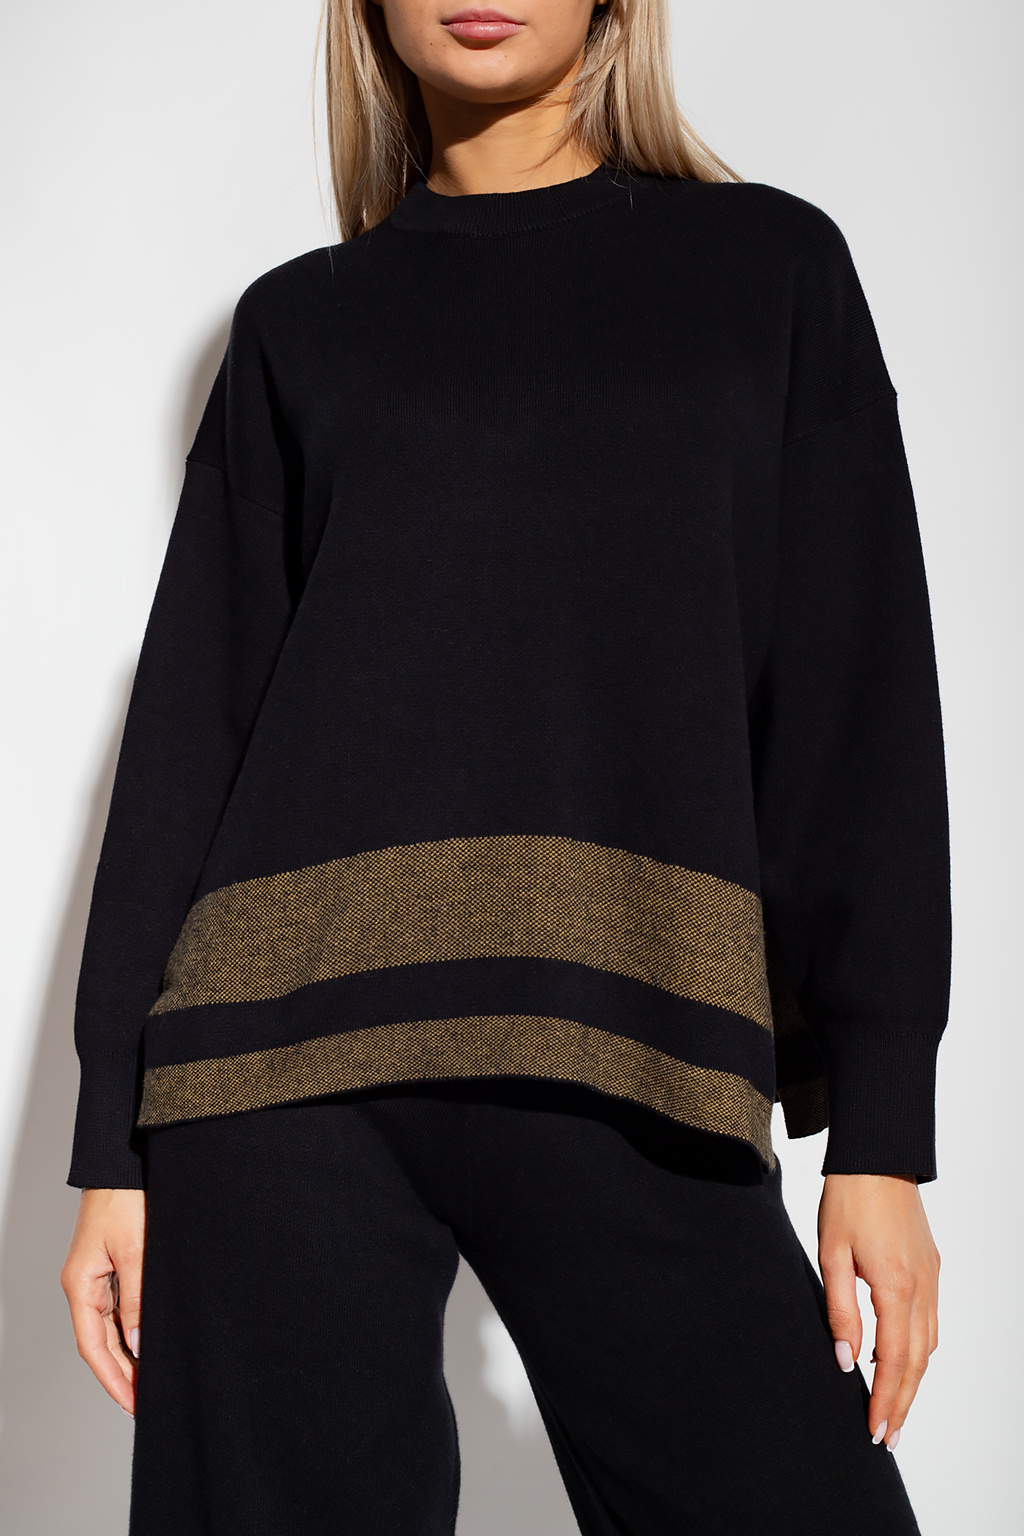 Proenza Schouler Shoulder Bags Relaxed-fitting sweater